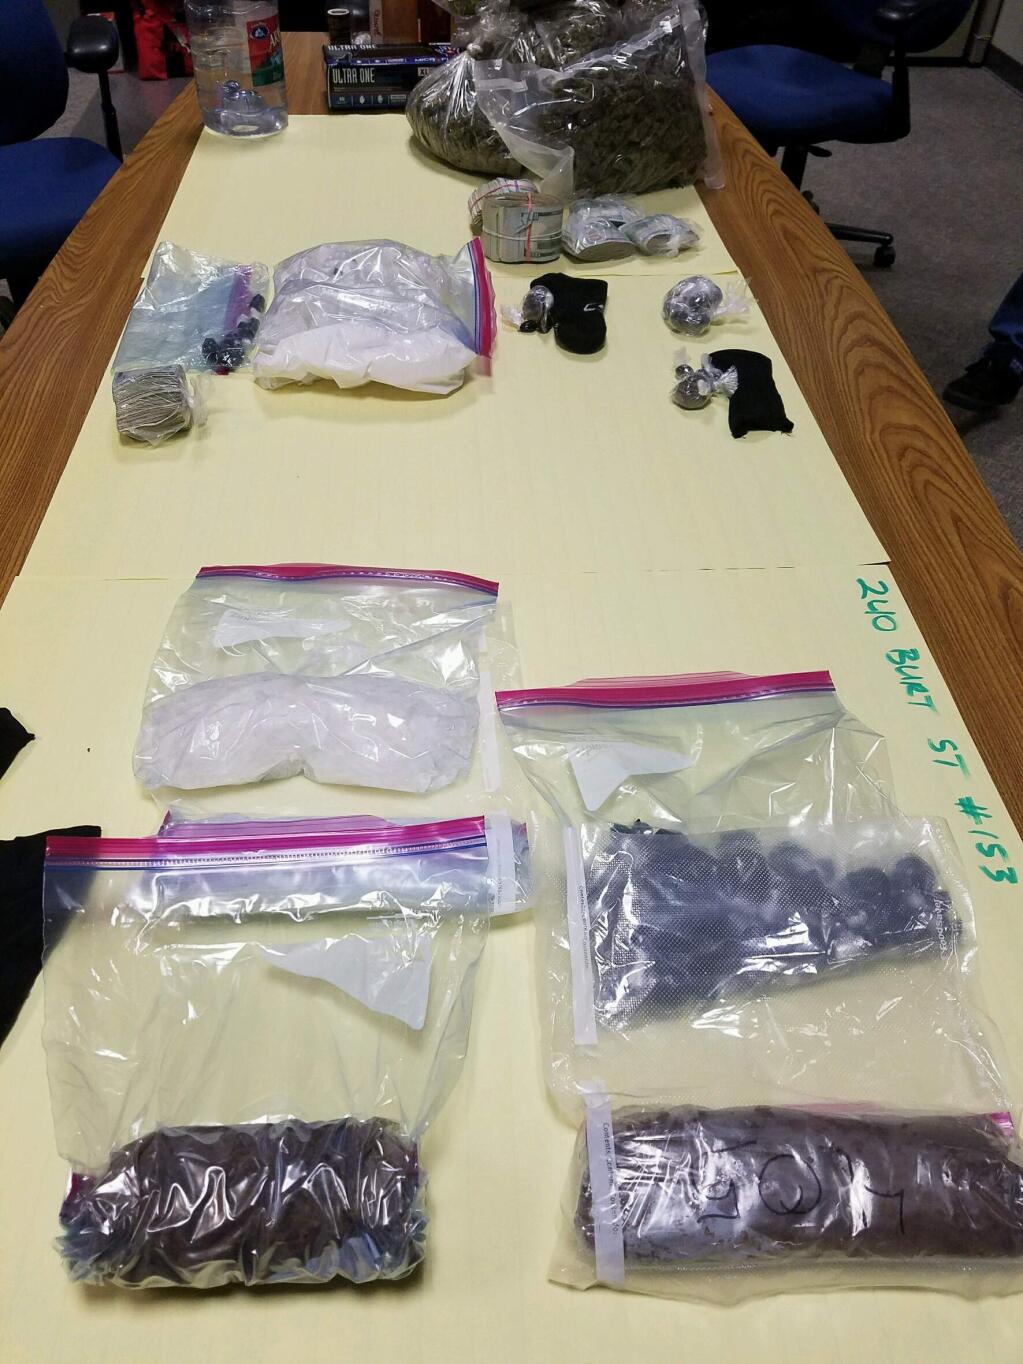 Some of the drugs seized by Santa Rosa police on Wednesday, Feb, 1, 2017, connected tothe arrests of Ulises Sandoval-Rivera, Artemio Sandoval-Rivera and two others. (COURTESY OF SANTA ROSA POLICE DEPARTMENT)